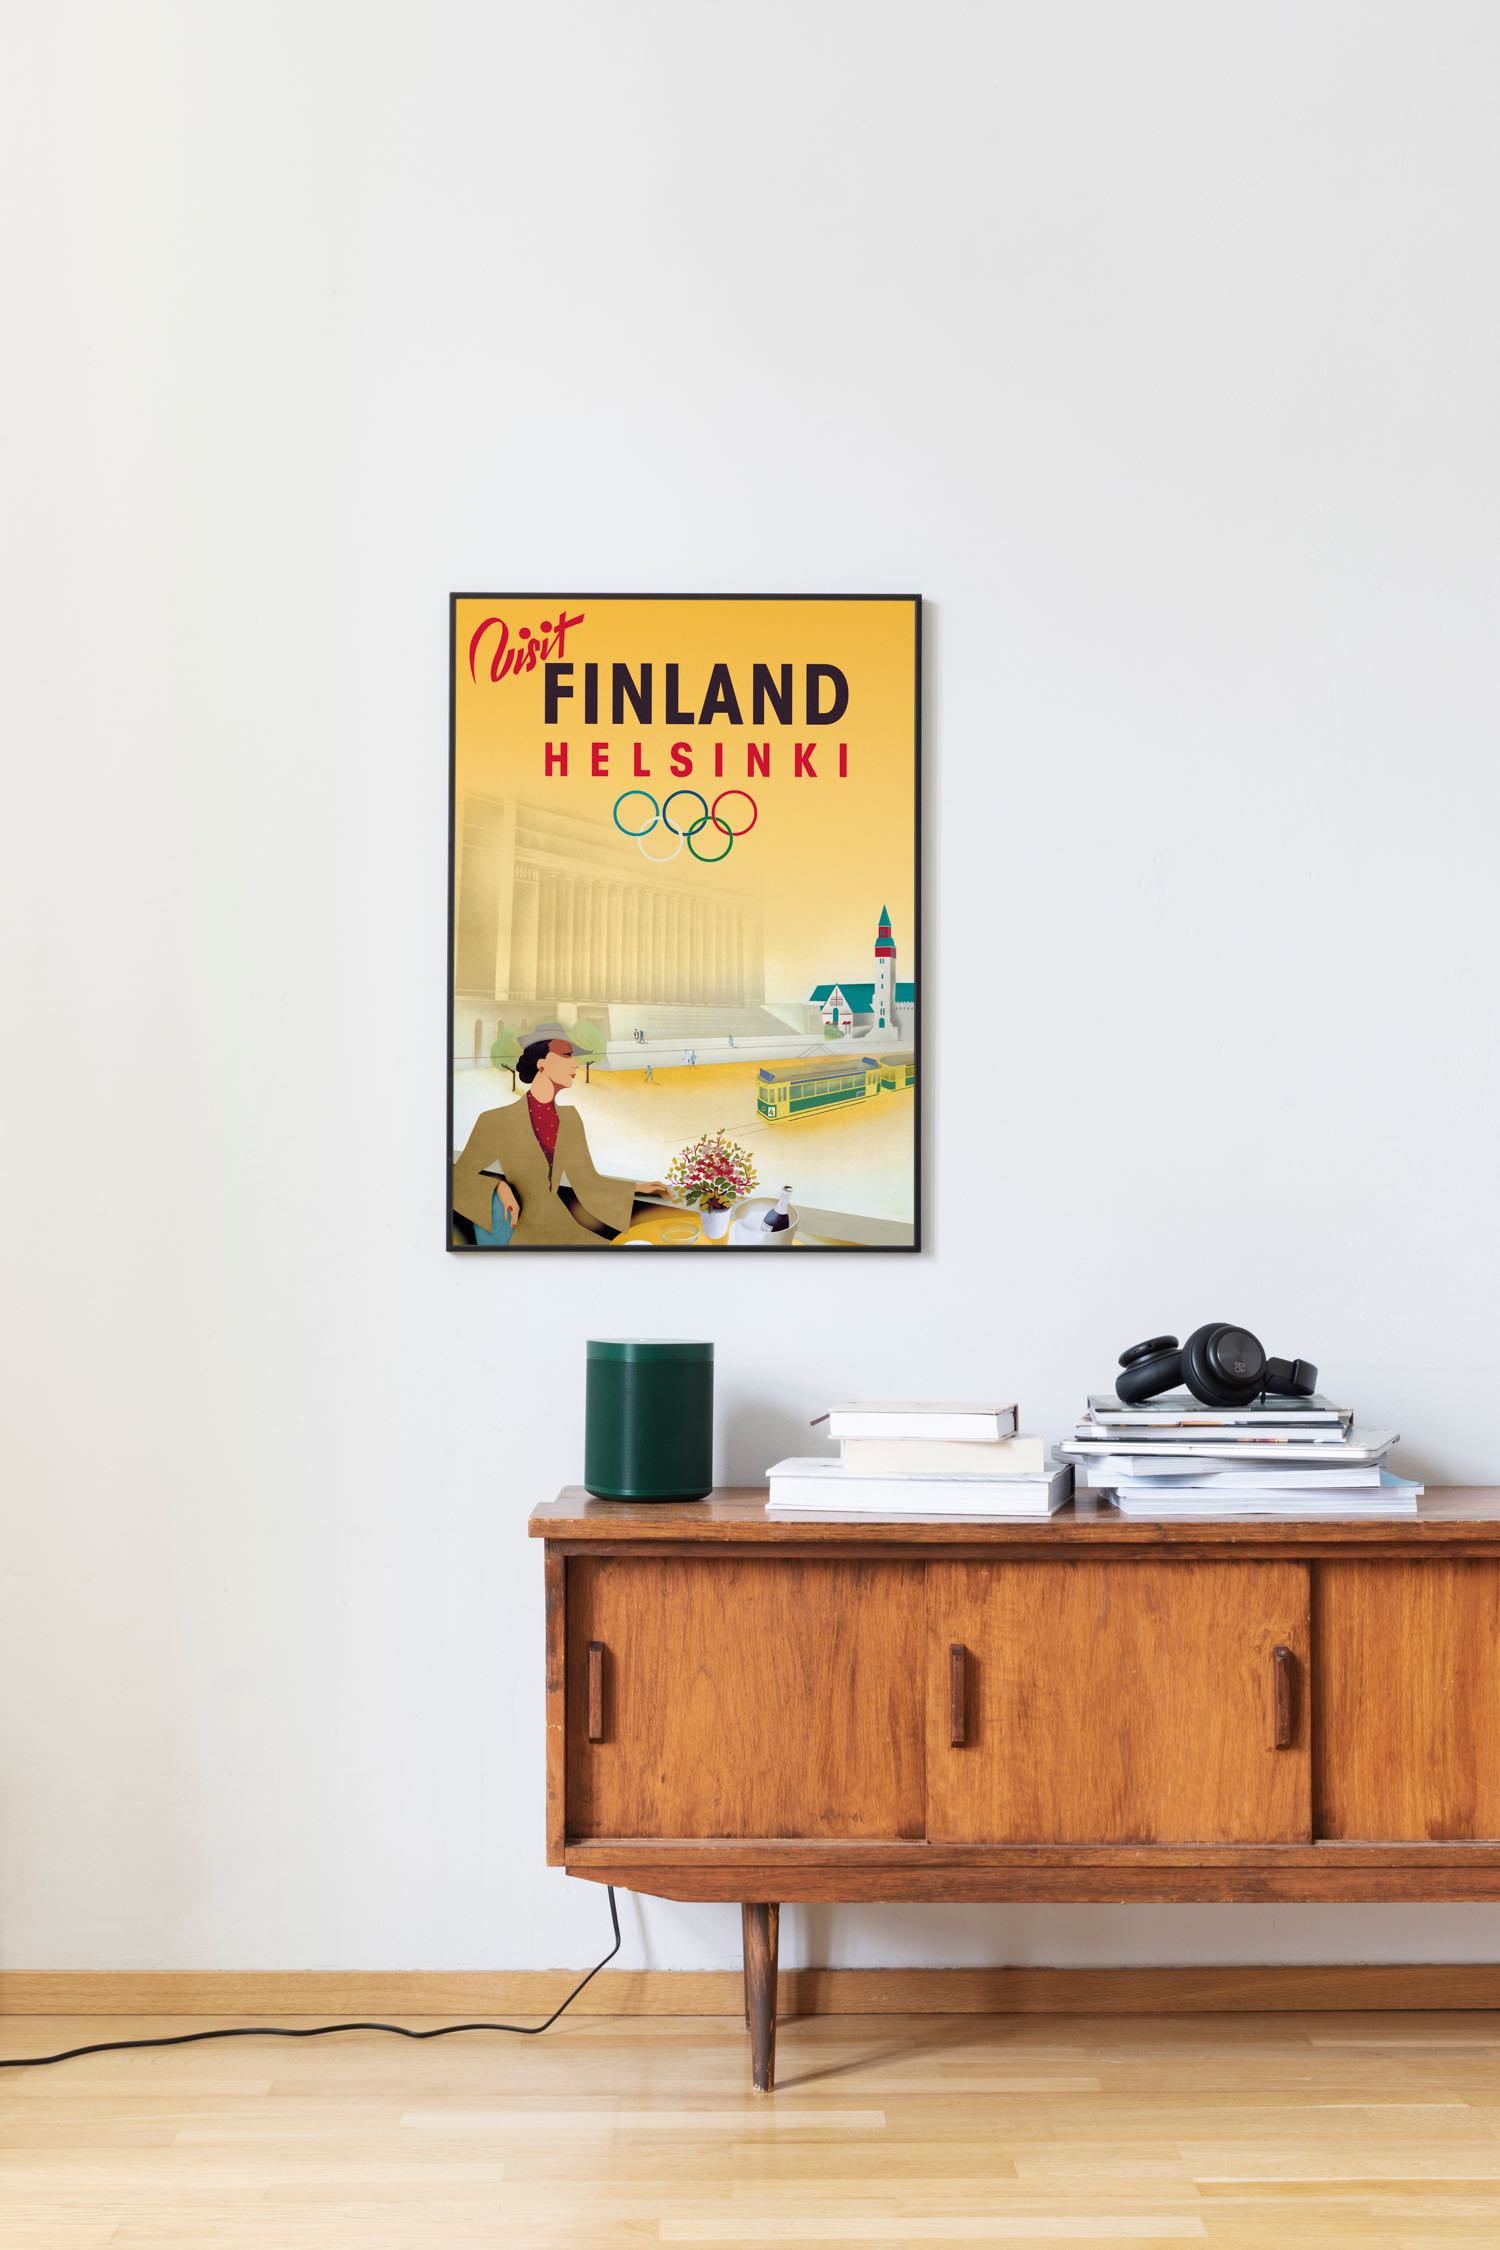 Poster of the champagne lady in Helsinki